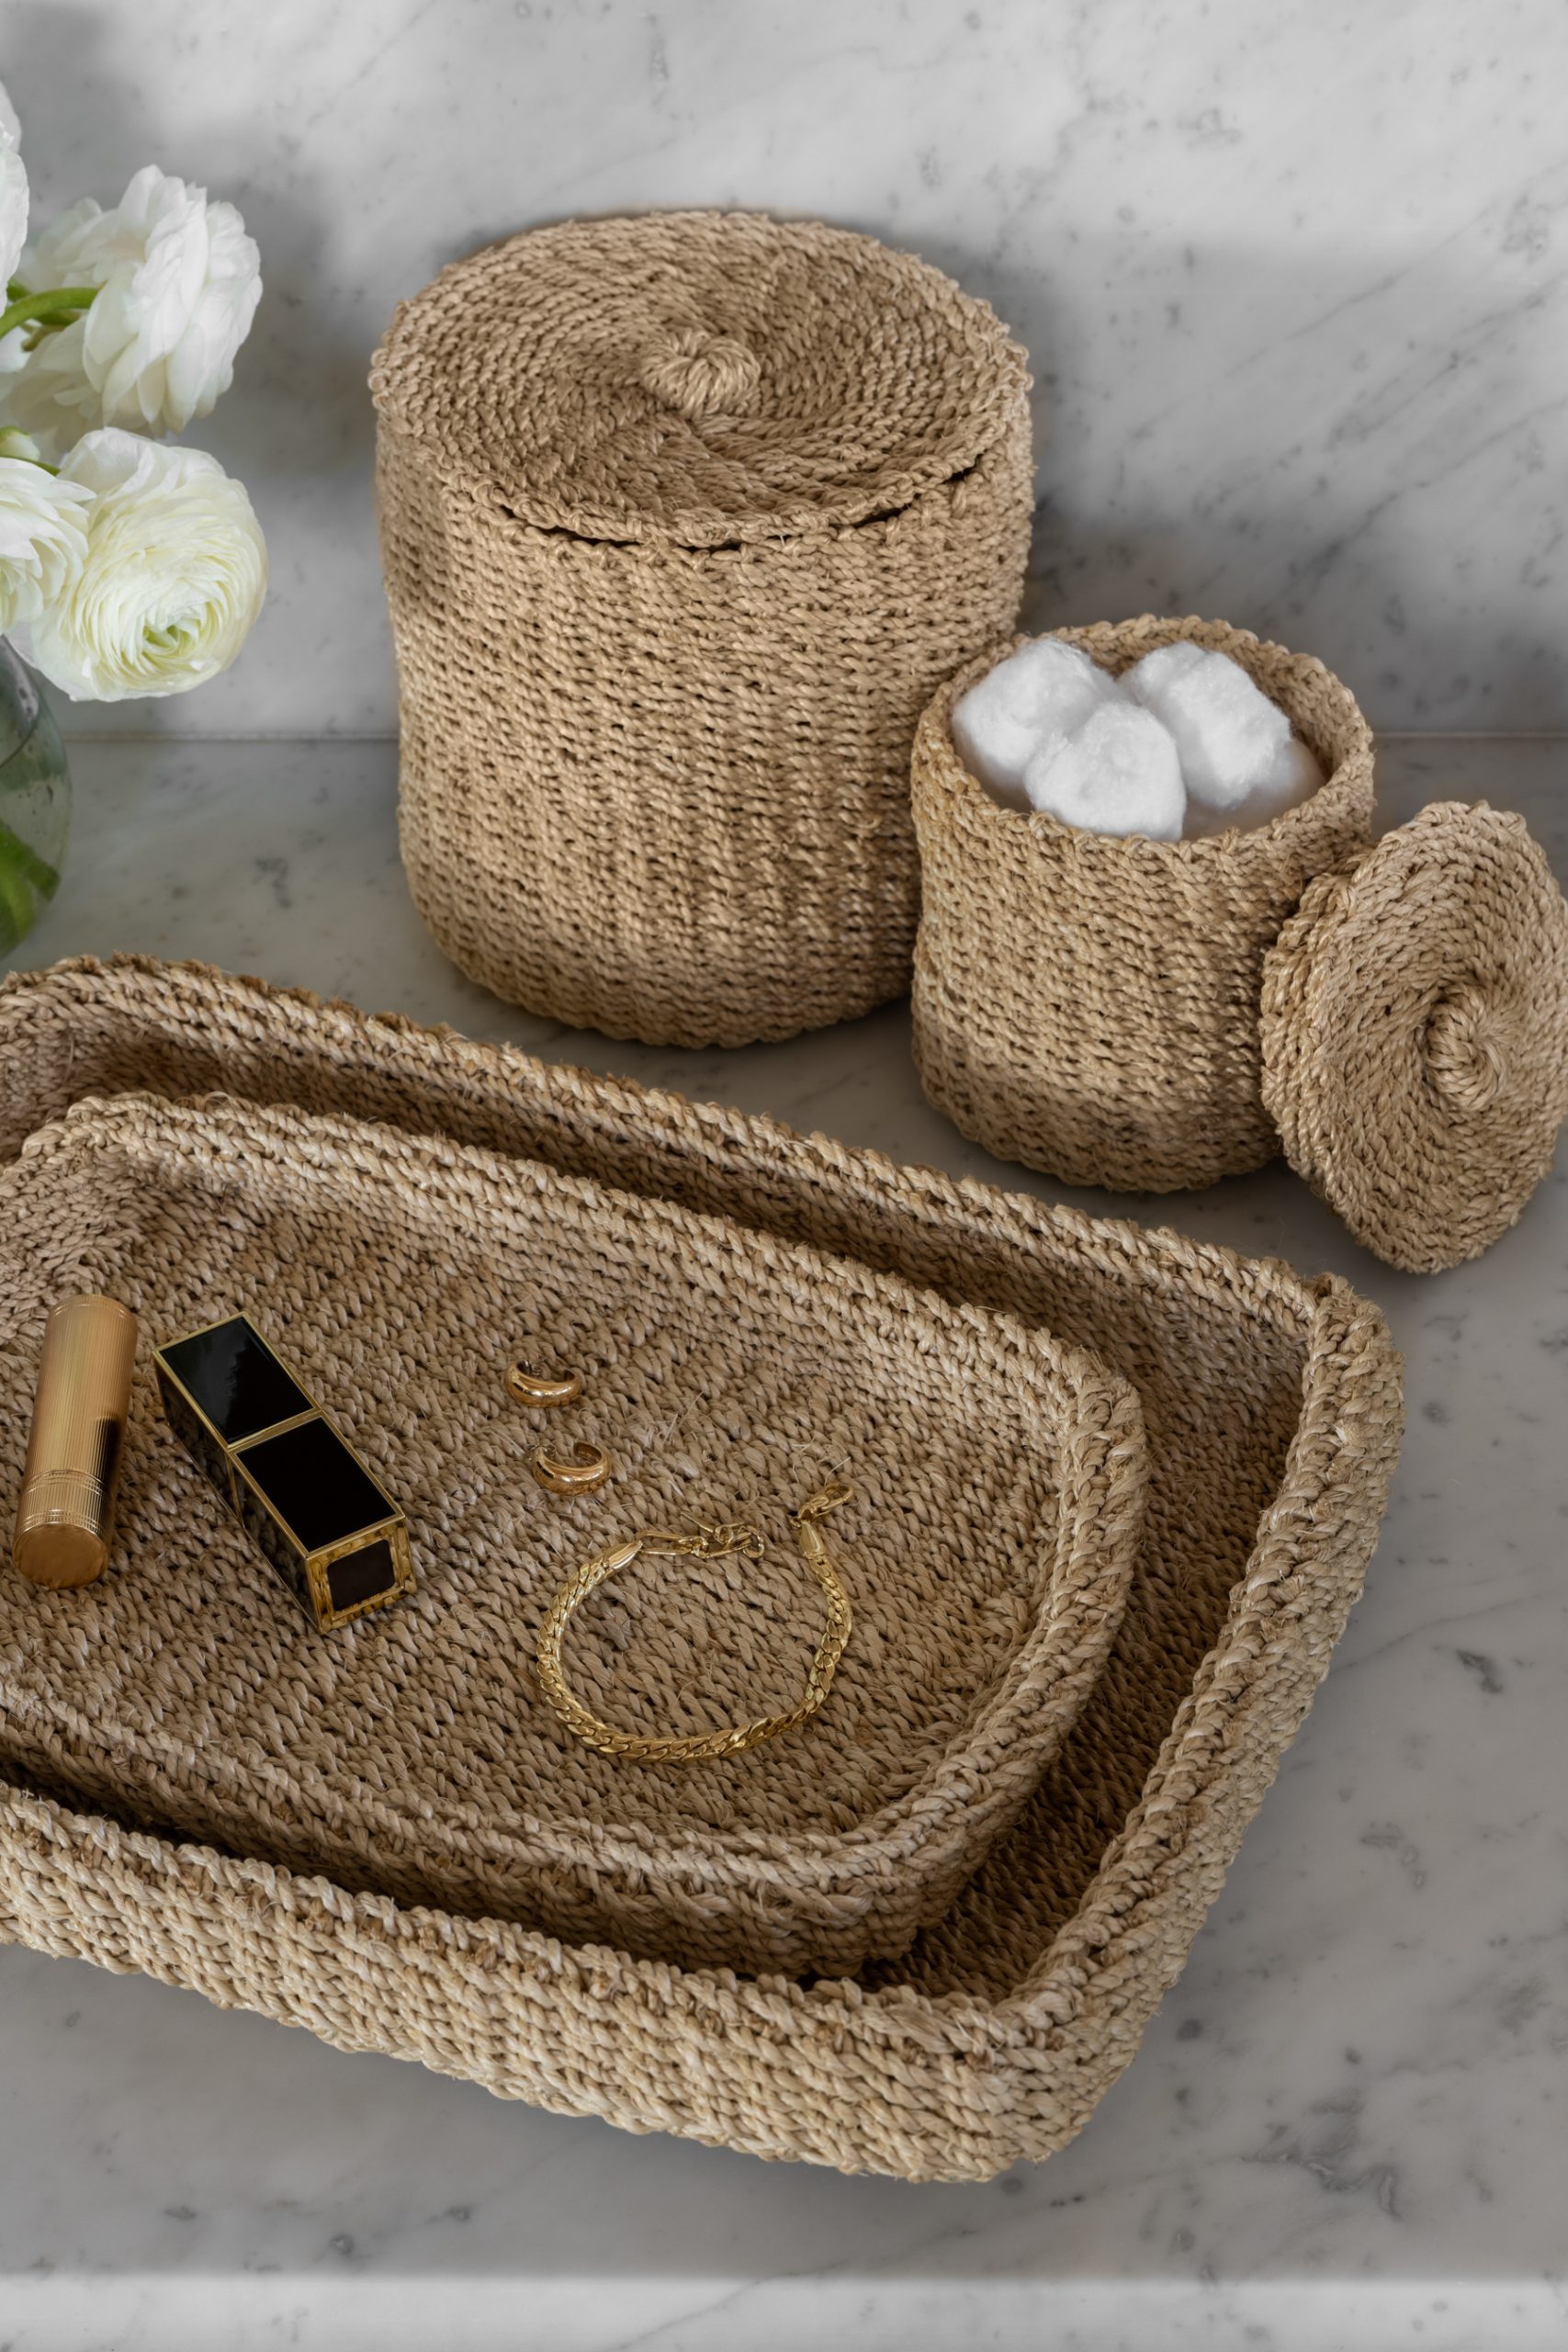 woven tray and canisters on bathroom countertop